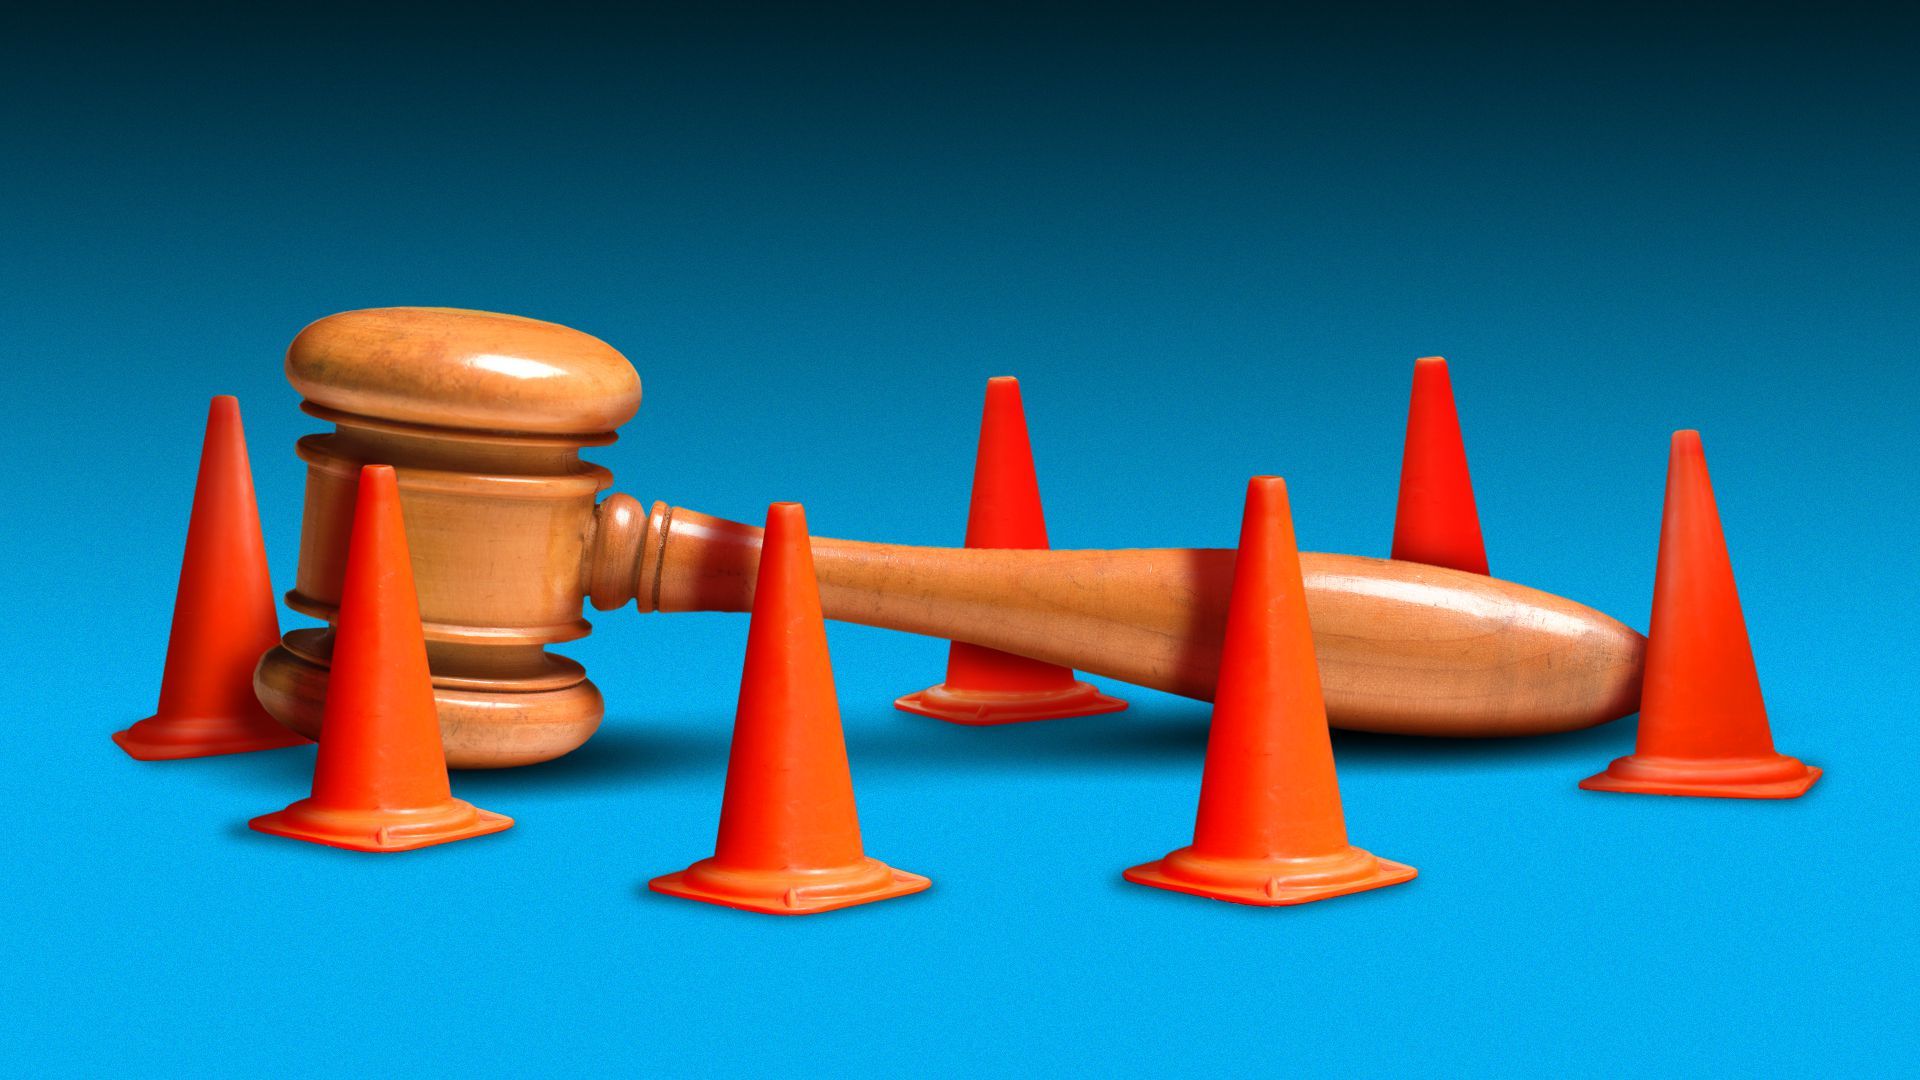 Illustration of a large gavel surrounded on all sides by orange traffic cones